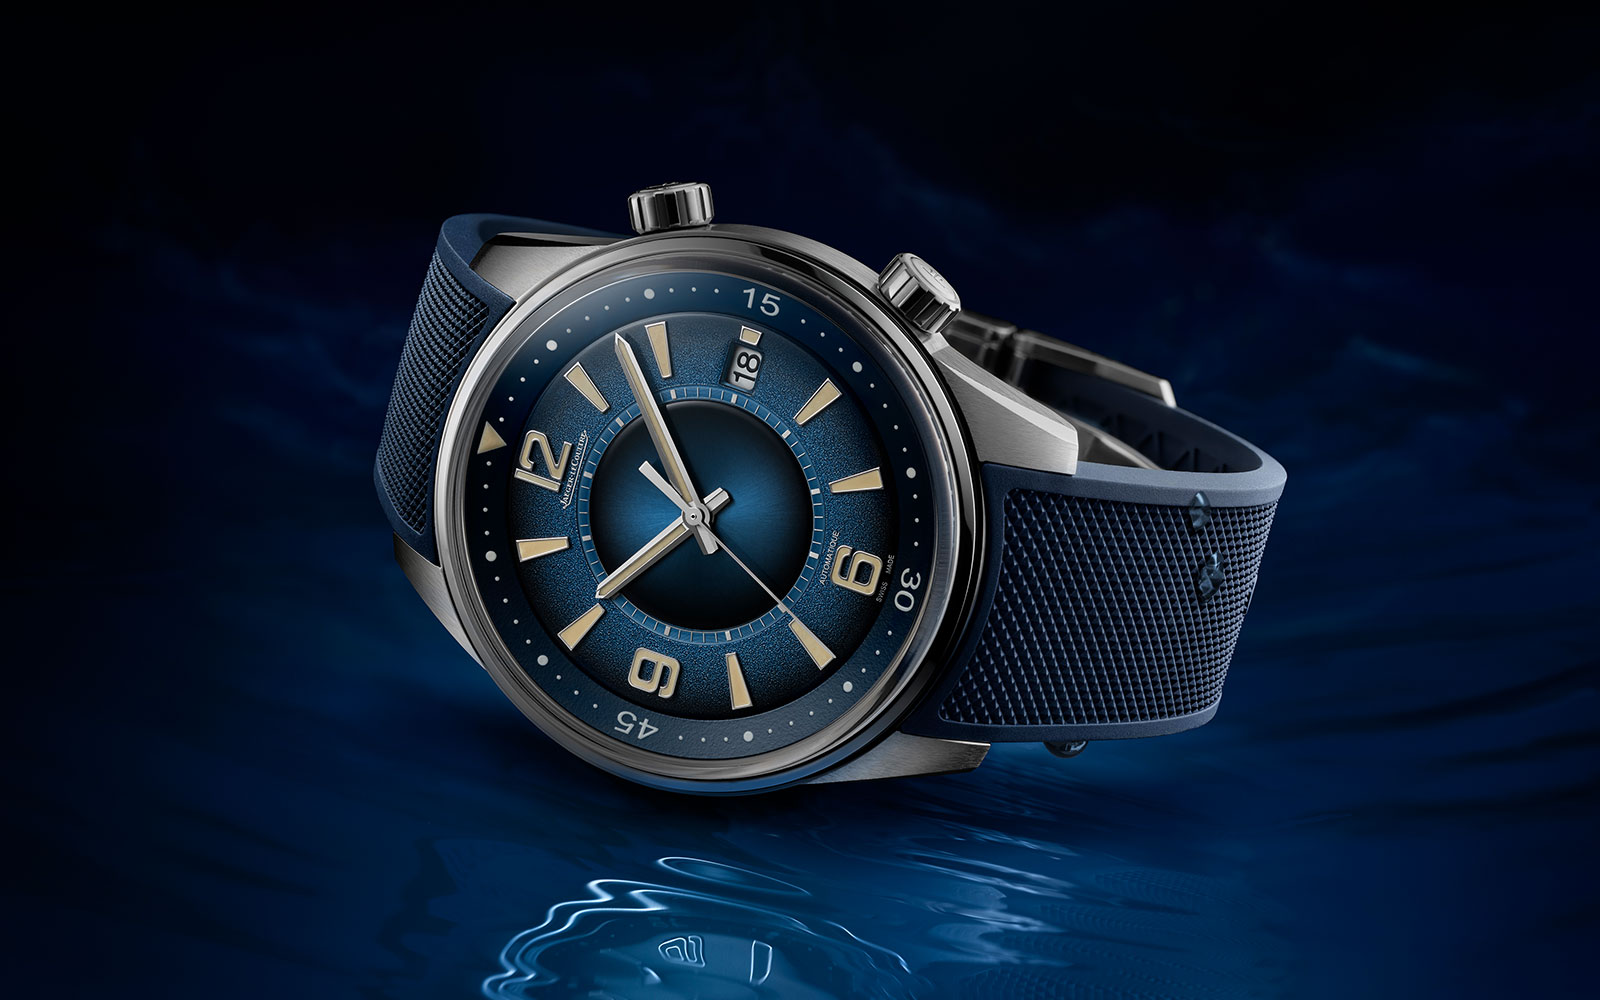 Jaeger-LeCoultre Polaris Date Limited Edition Q9068681 | lupon.gov.ph